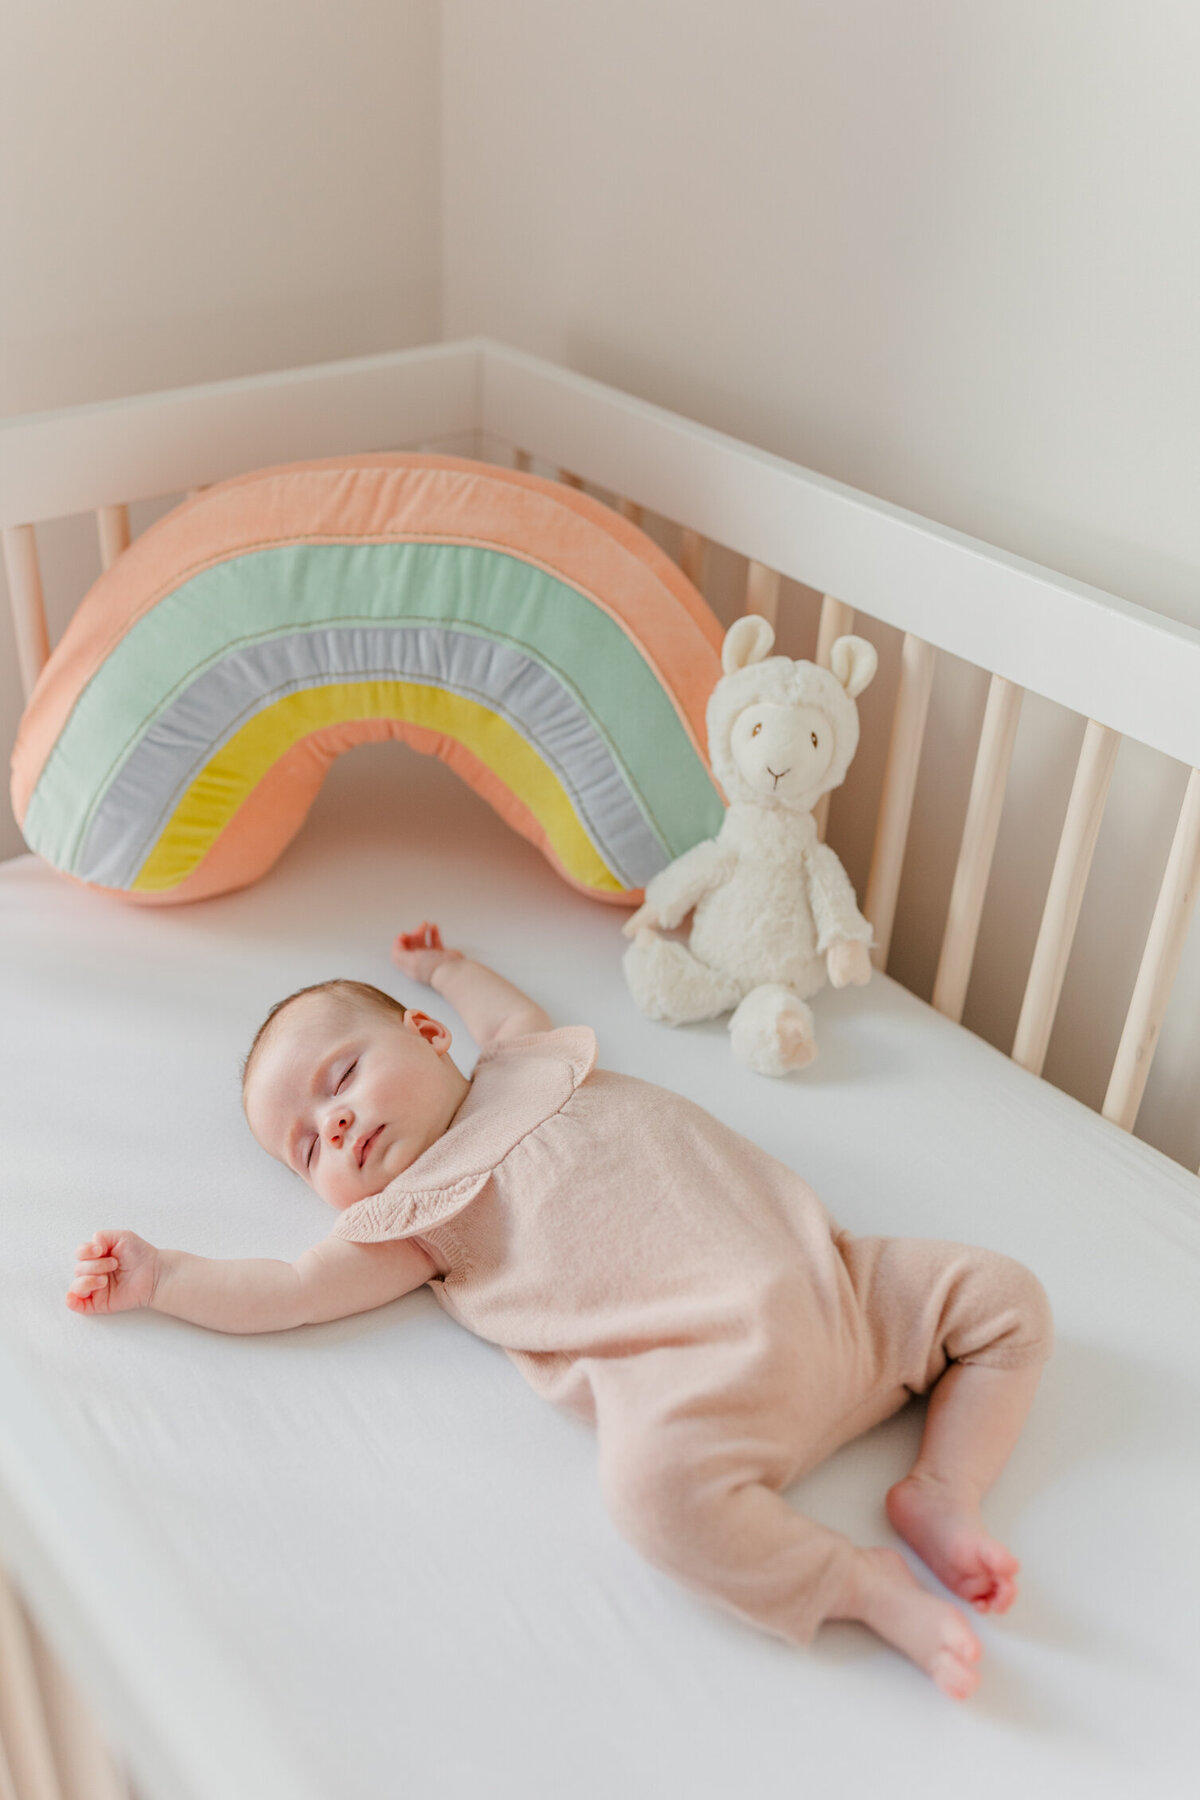 Newborn Photographer in Massachusetts | Baby in soft pink outfit sleeping with her hands up by her head in a crib decorated with a rainbow and llama plushie